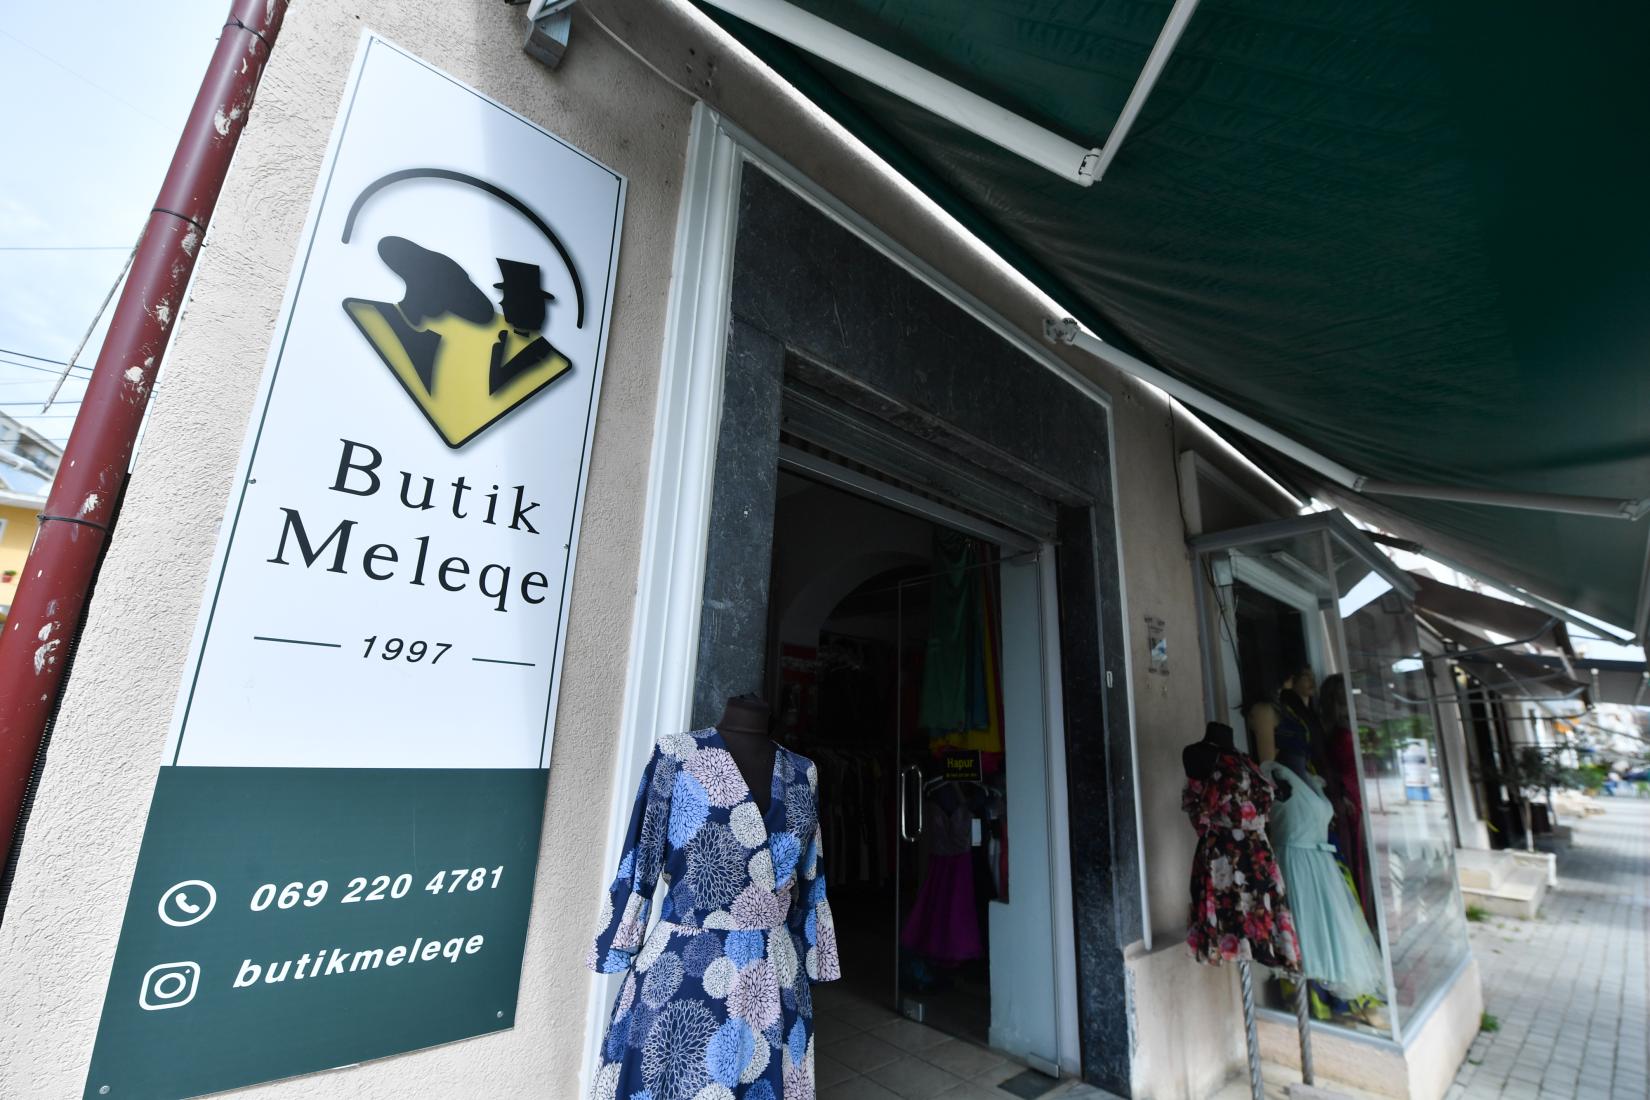 Meleqe's clothing boutique now has a new attractive brand image.